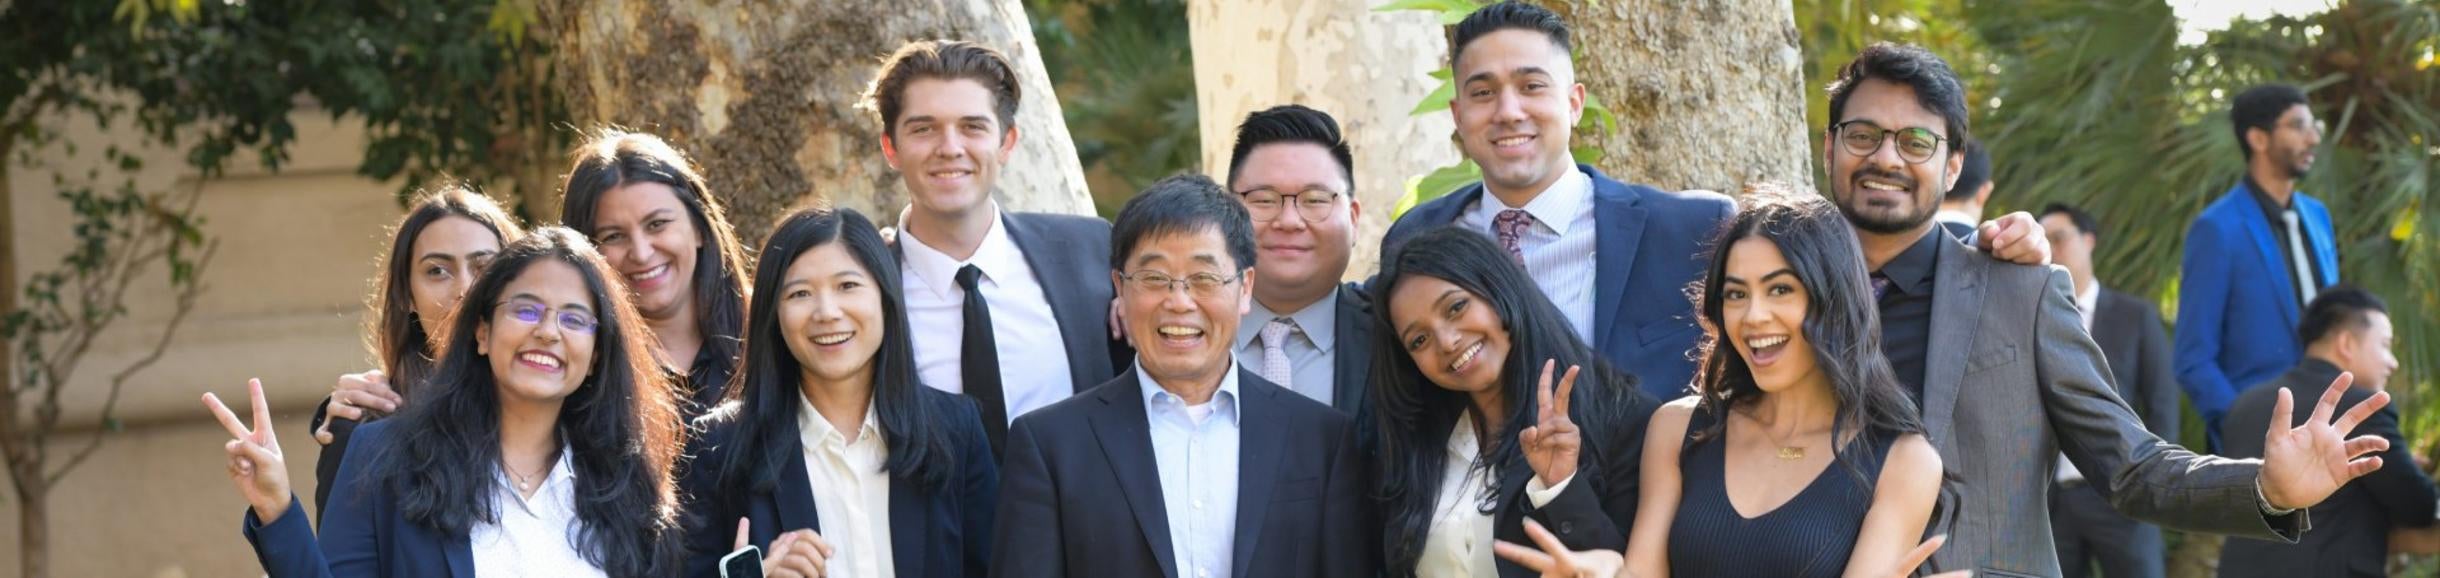 UCR School of Business students with Dean Wang